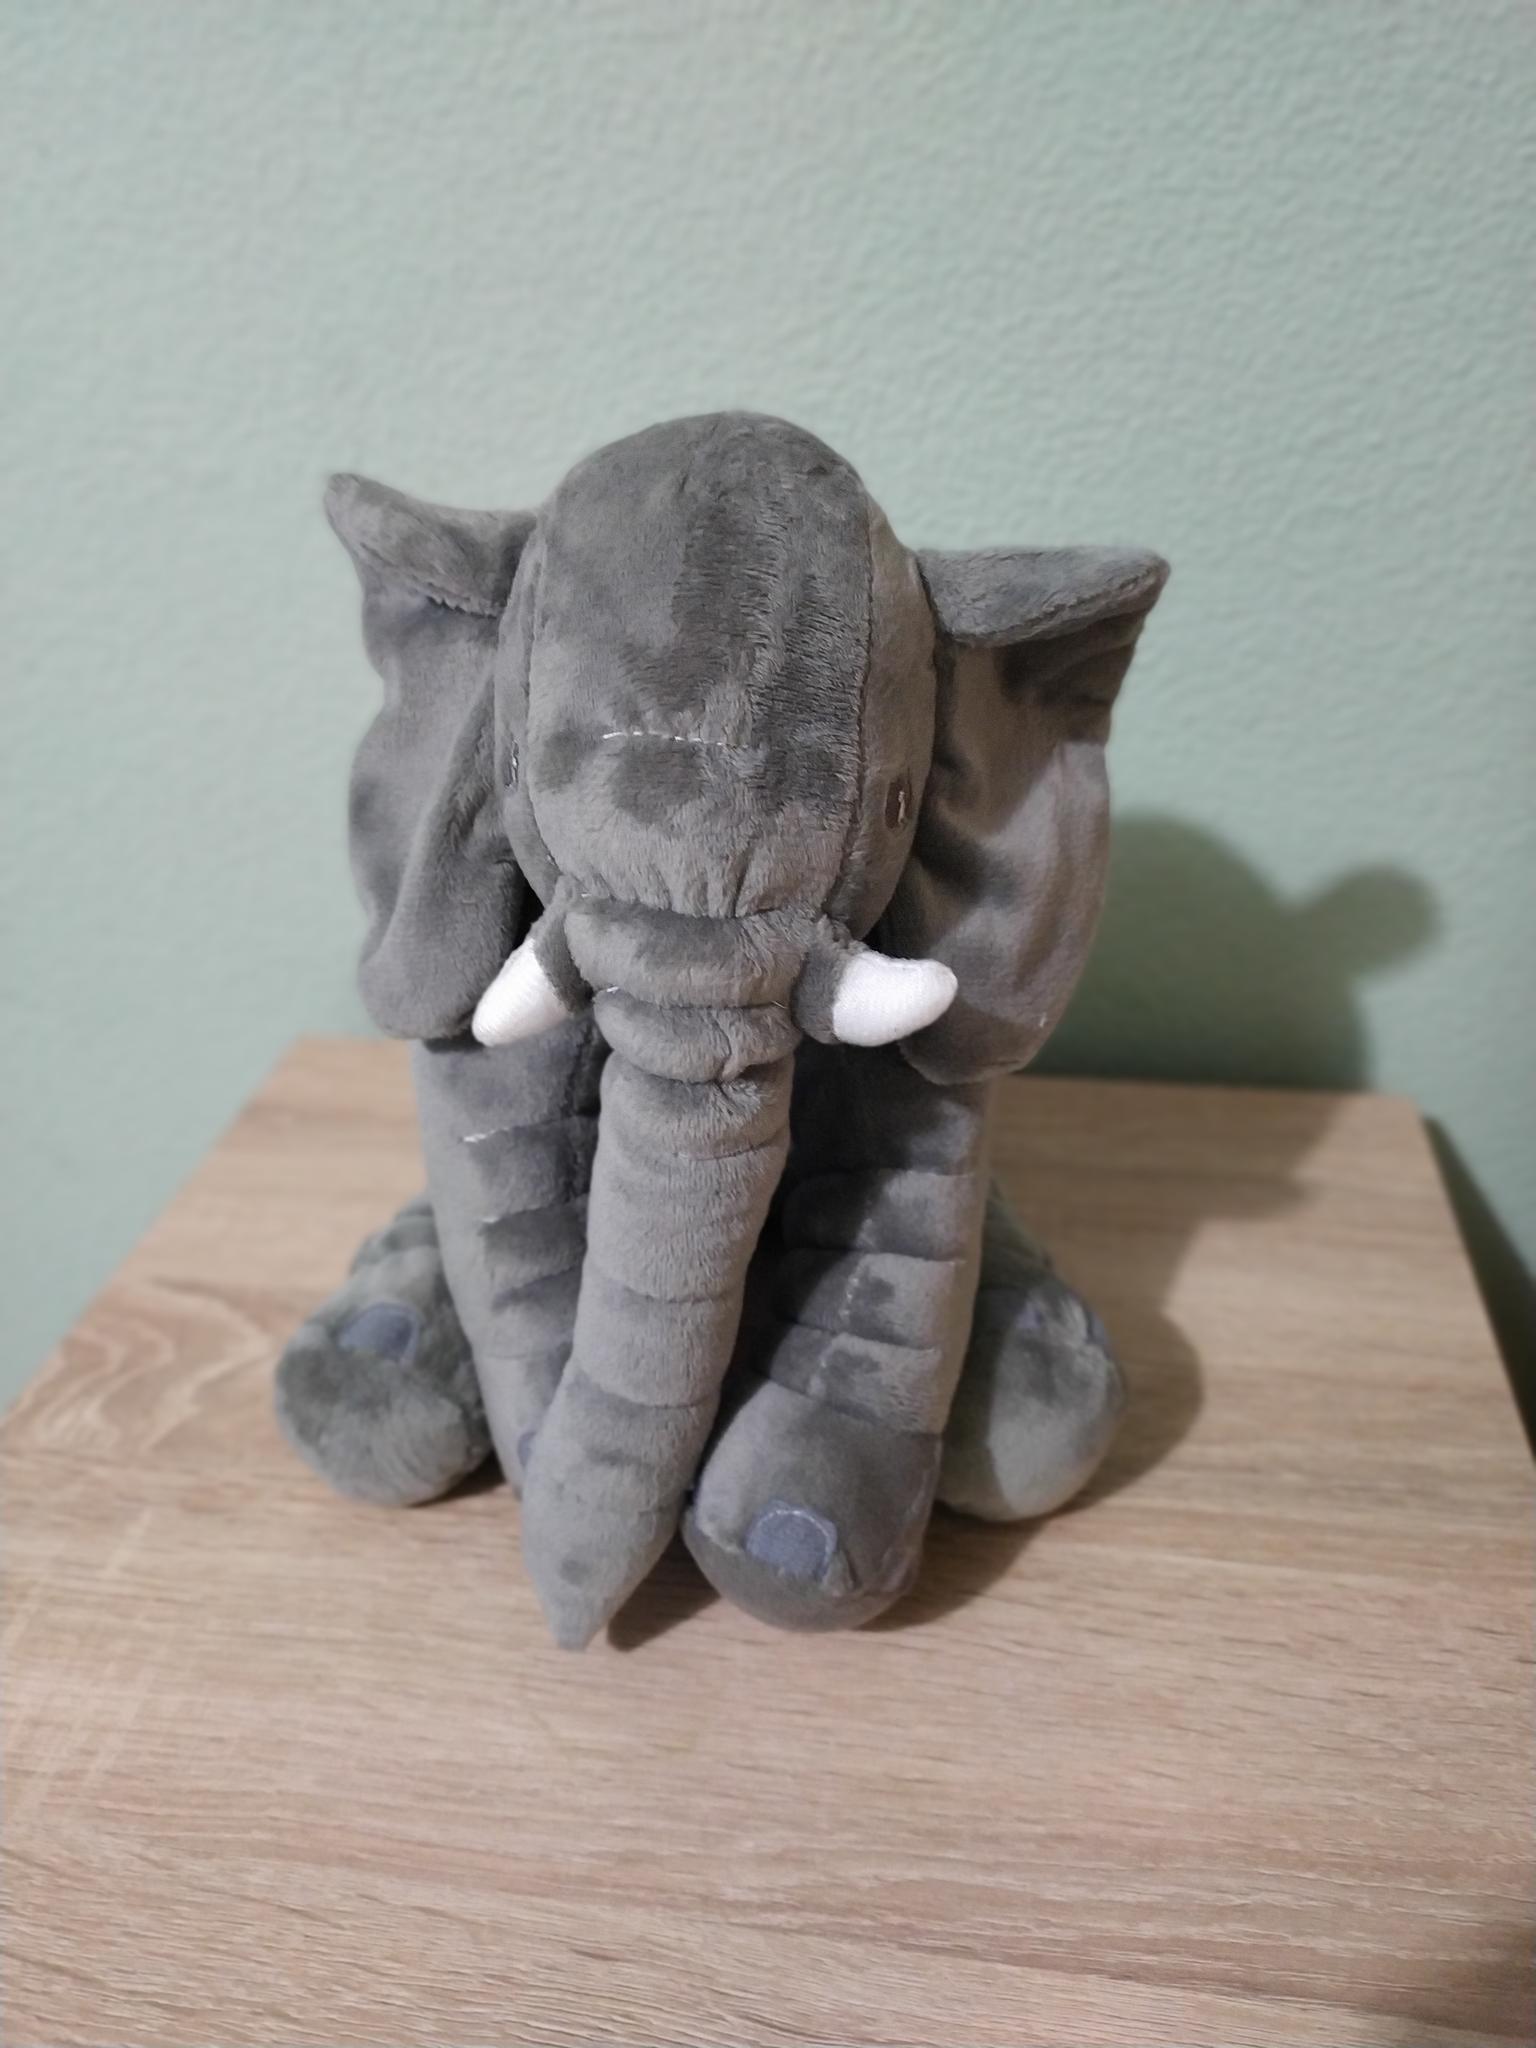 Elephant Stuffed Animal Plush Toy Baby Pillow, Elephant Pillow Baby Comfort Doll photo review